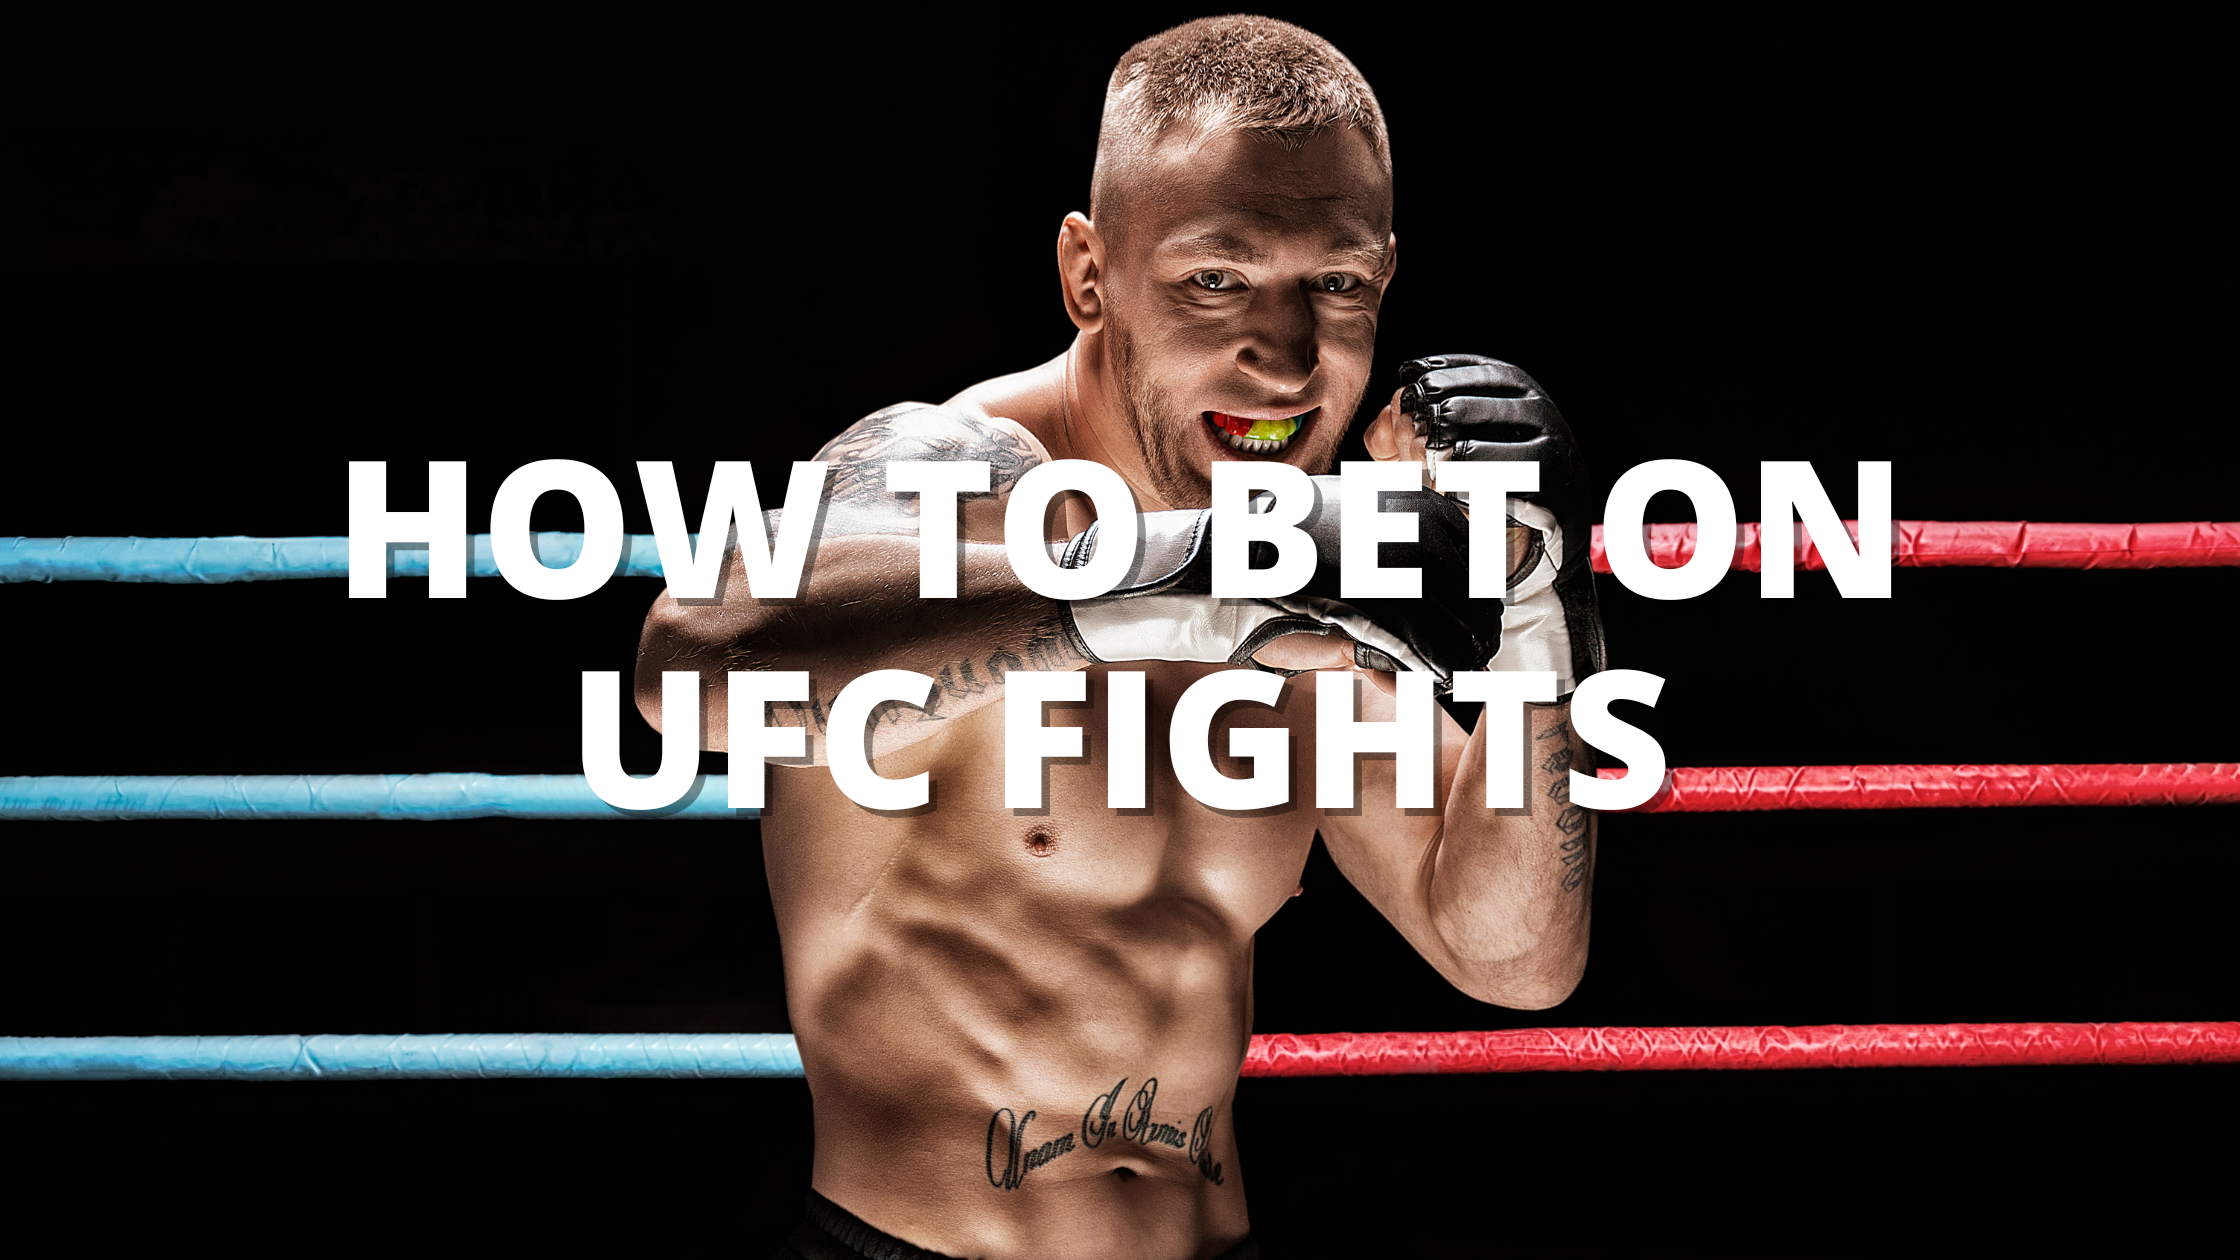 How To Bet on UFC Fights